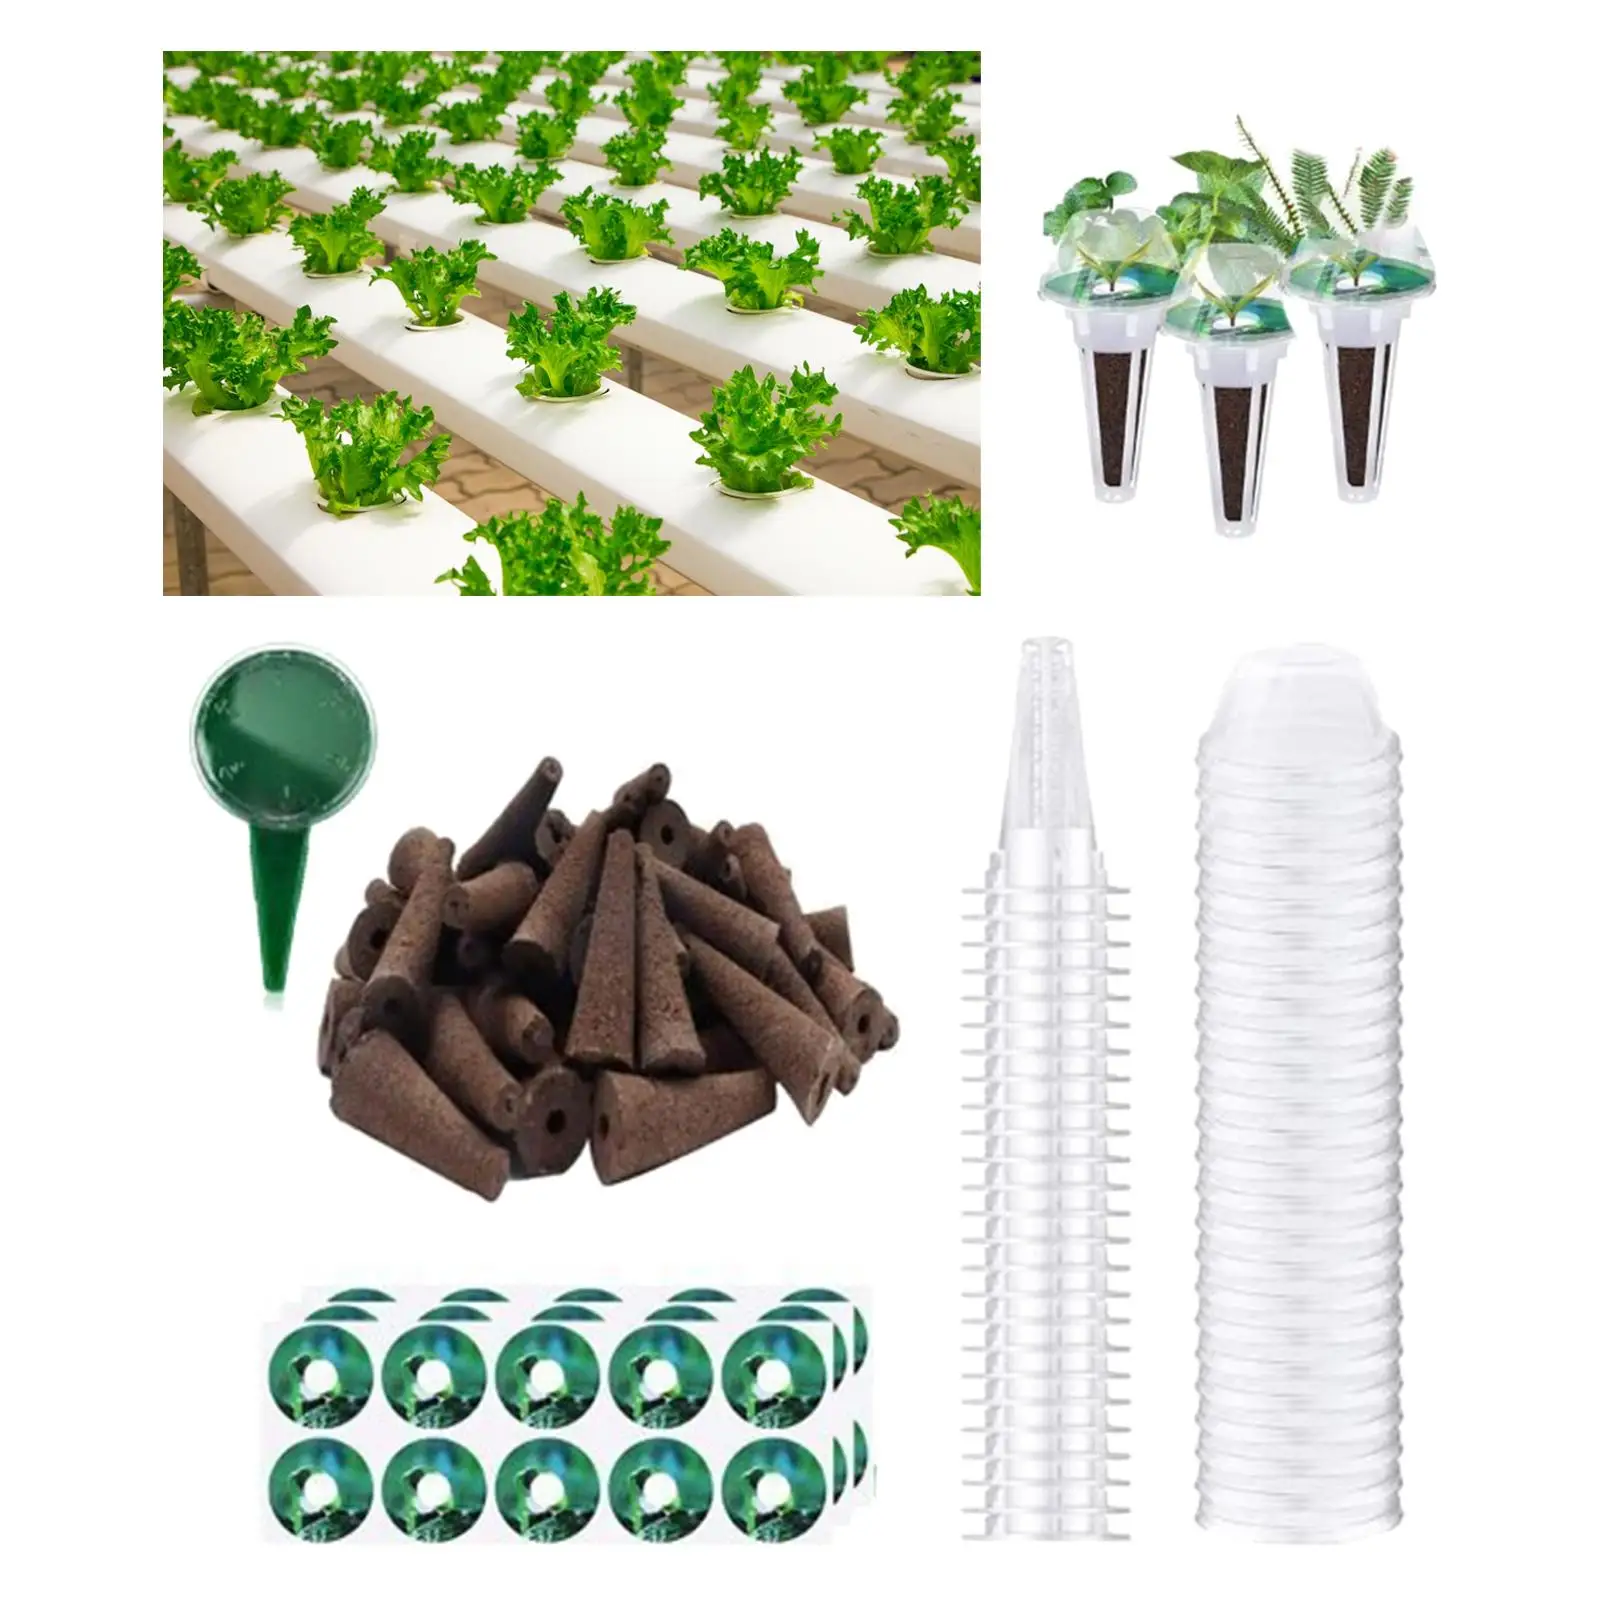 Soilless Cultivation Hydroponics Mesh Net Cups Replacement Starting System Garden Slotted Cups for Greenhouse Garden Aquaponics